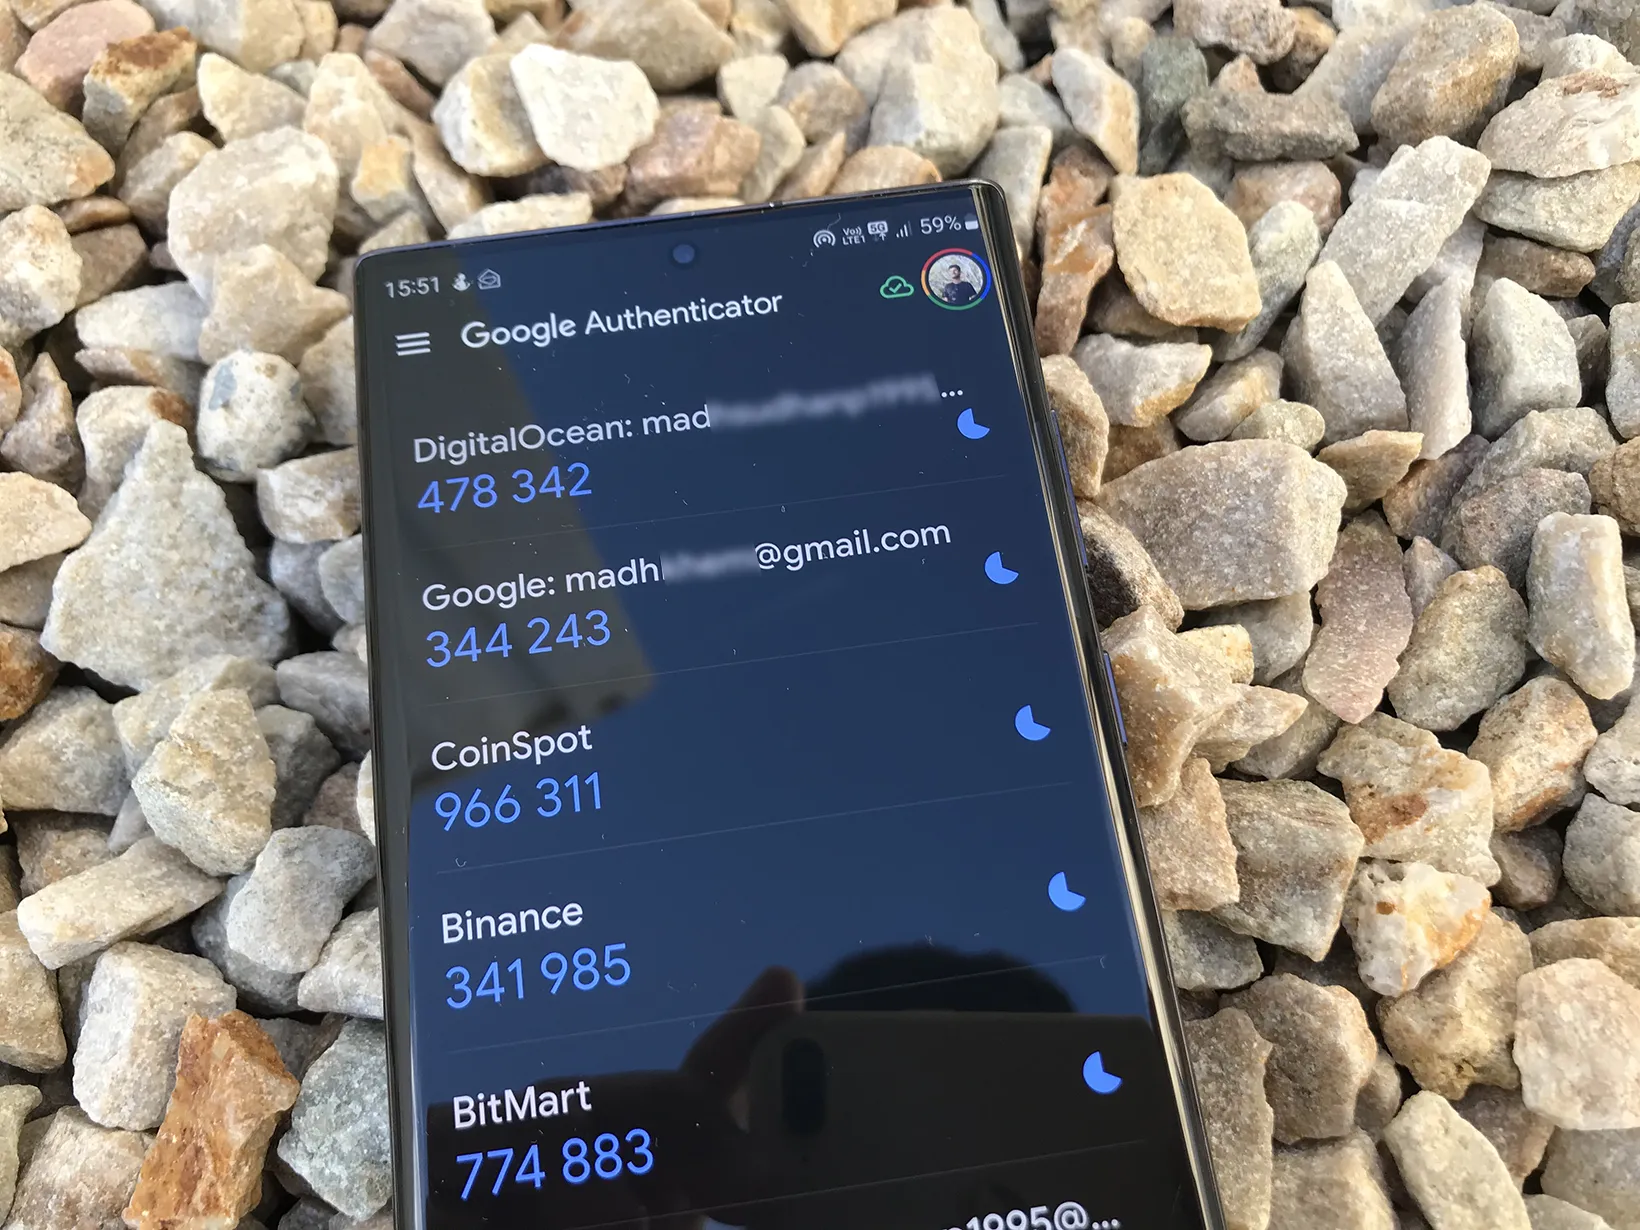 Cloud Backup in Google Authenticator